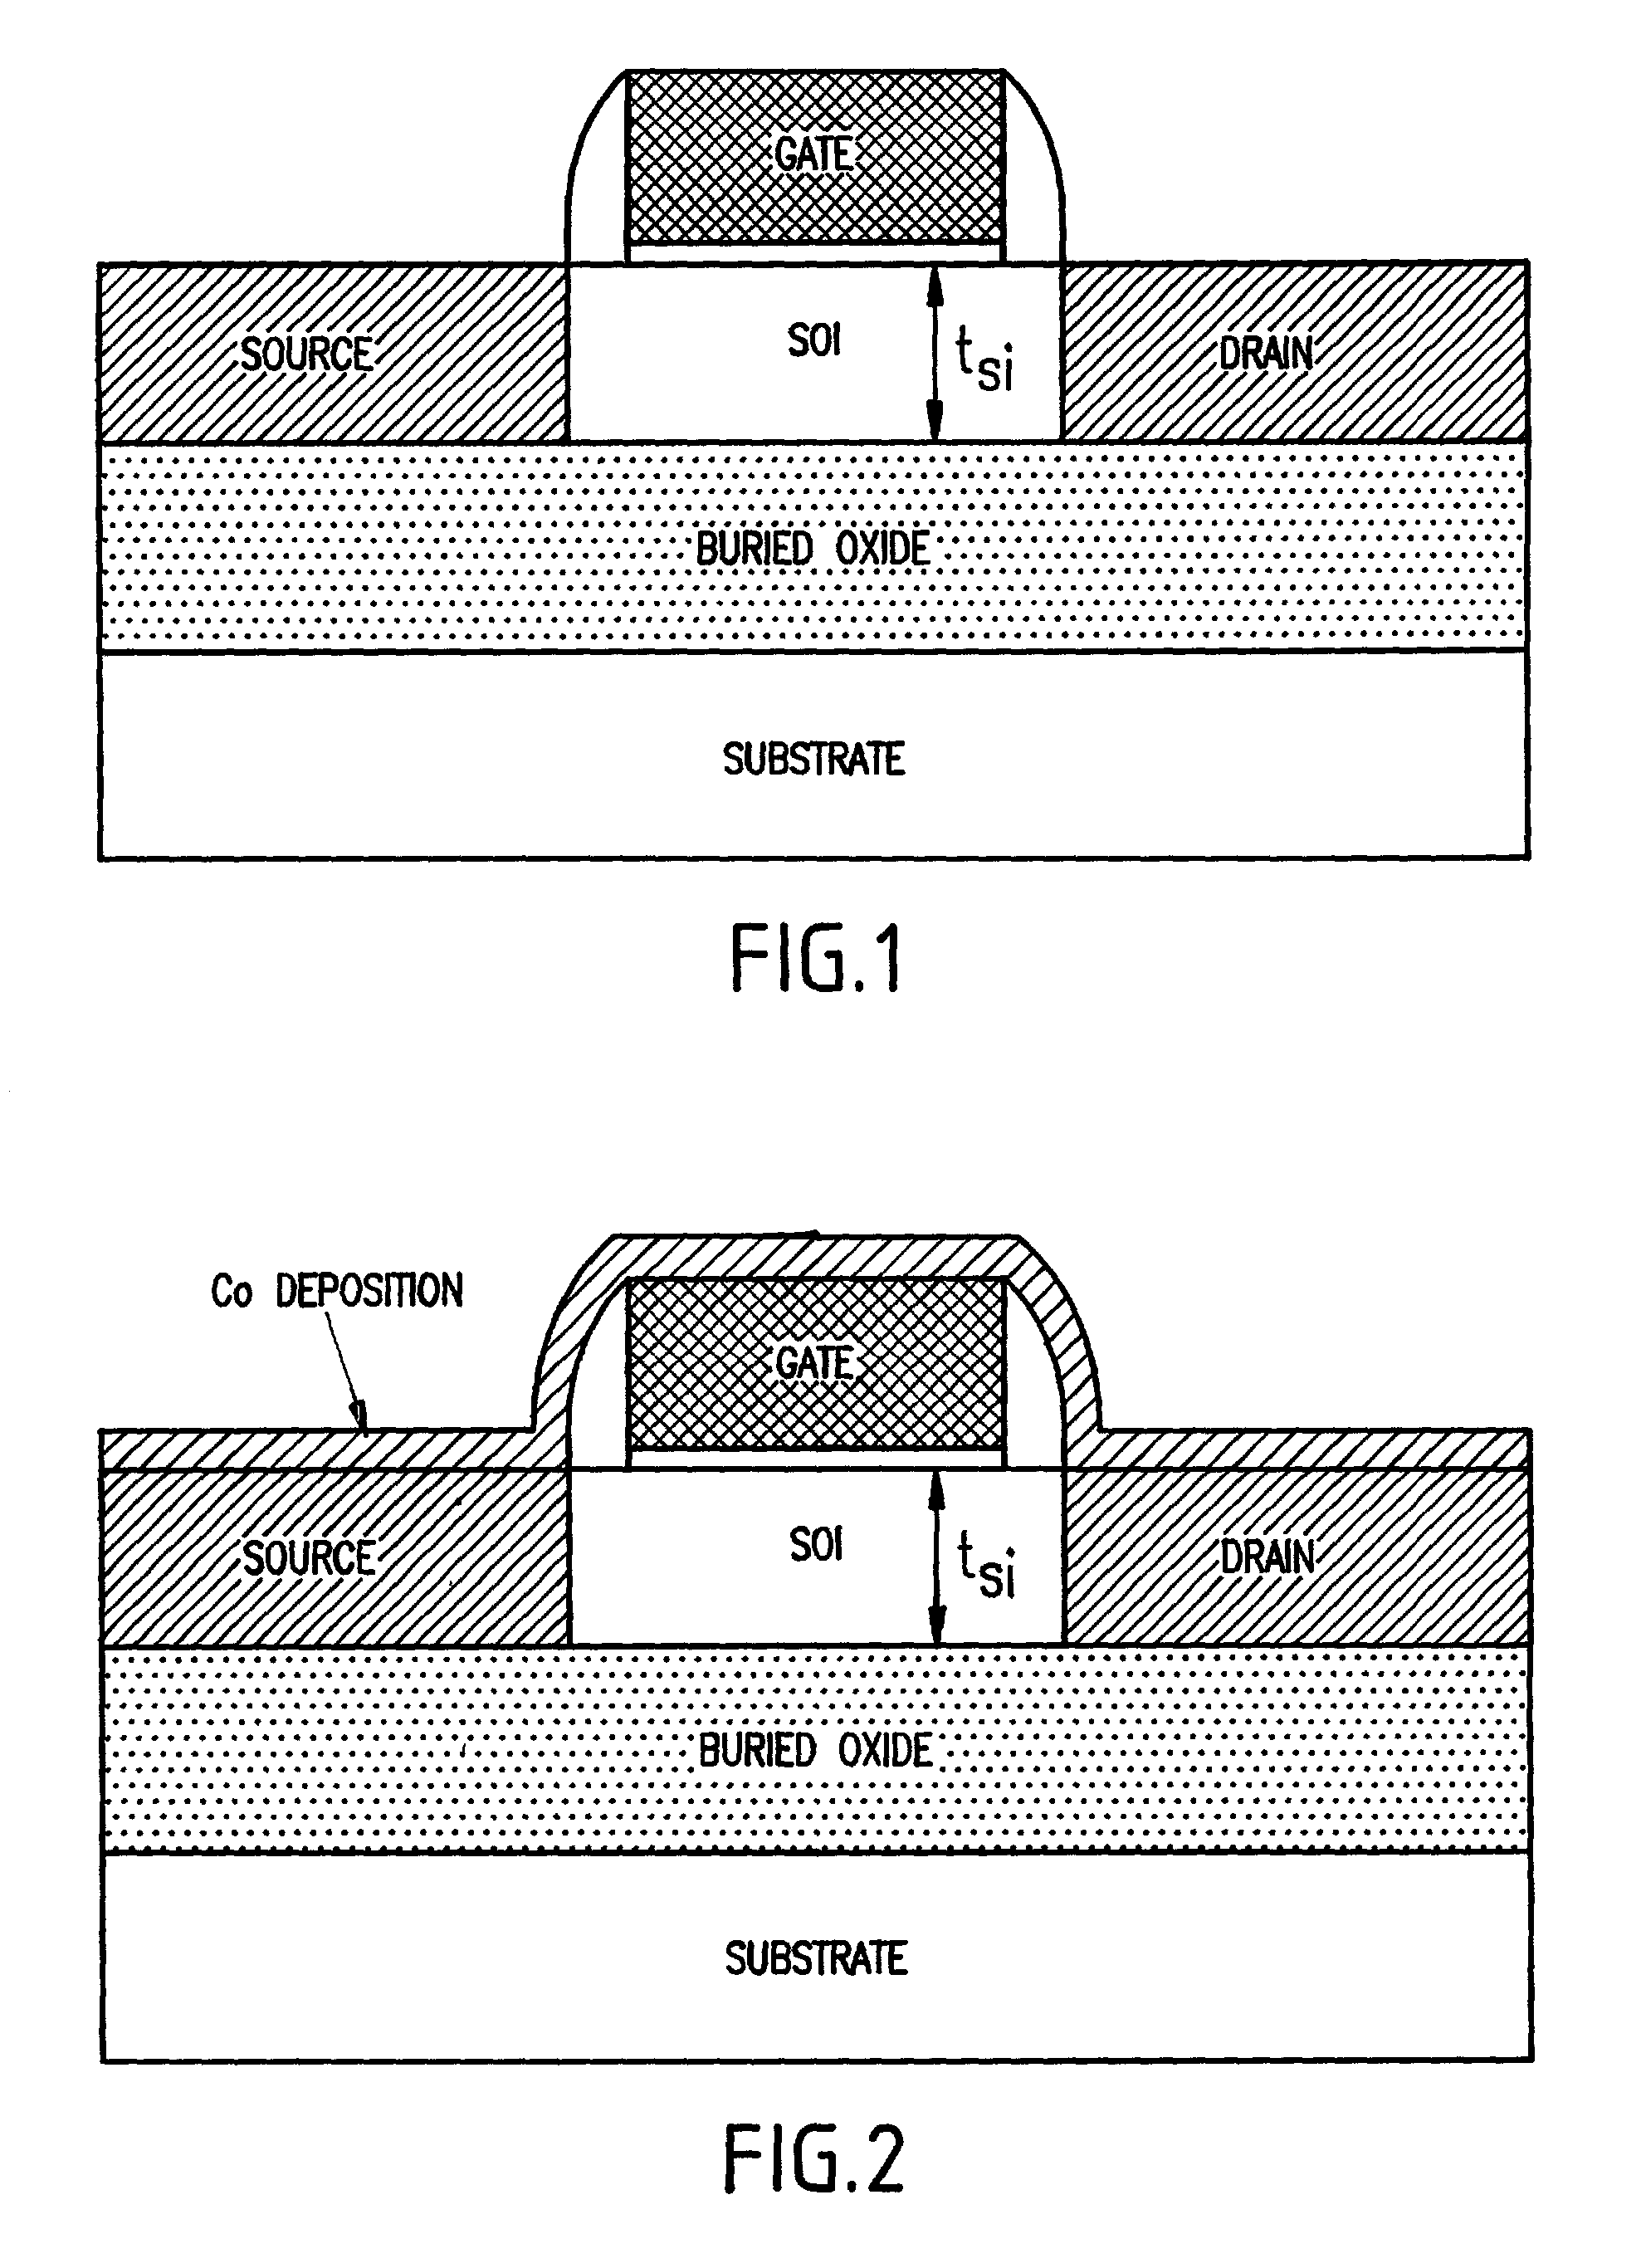 Self-aligned silicide (salicide) process for low resistivity contacts to thin film silicon-on-insulator and bulk MOSFETS and for shallow Junctions